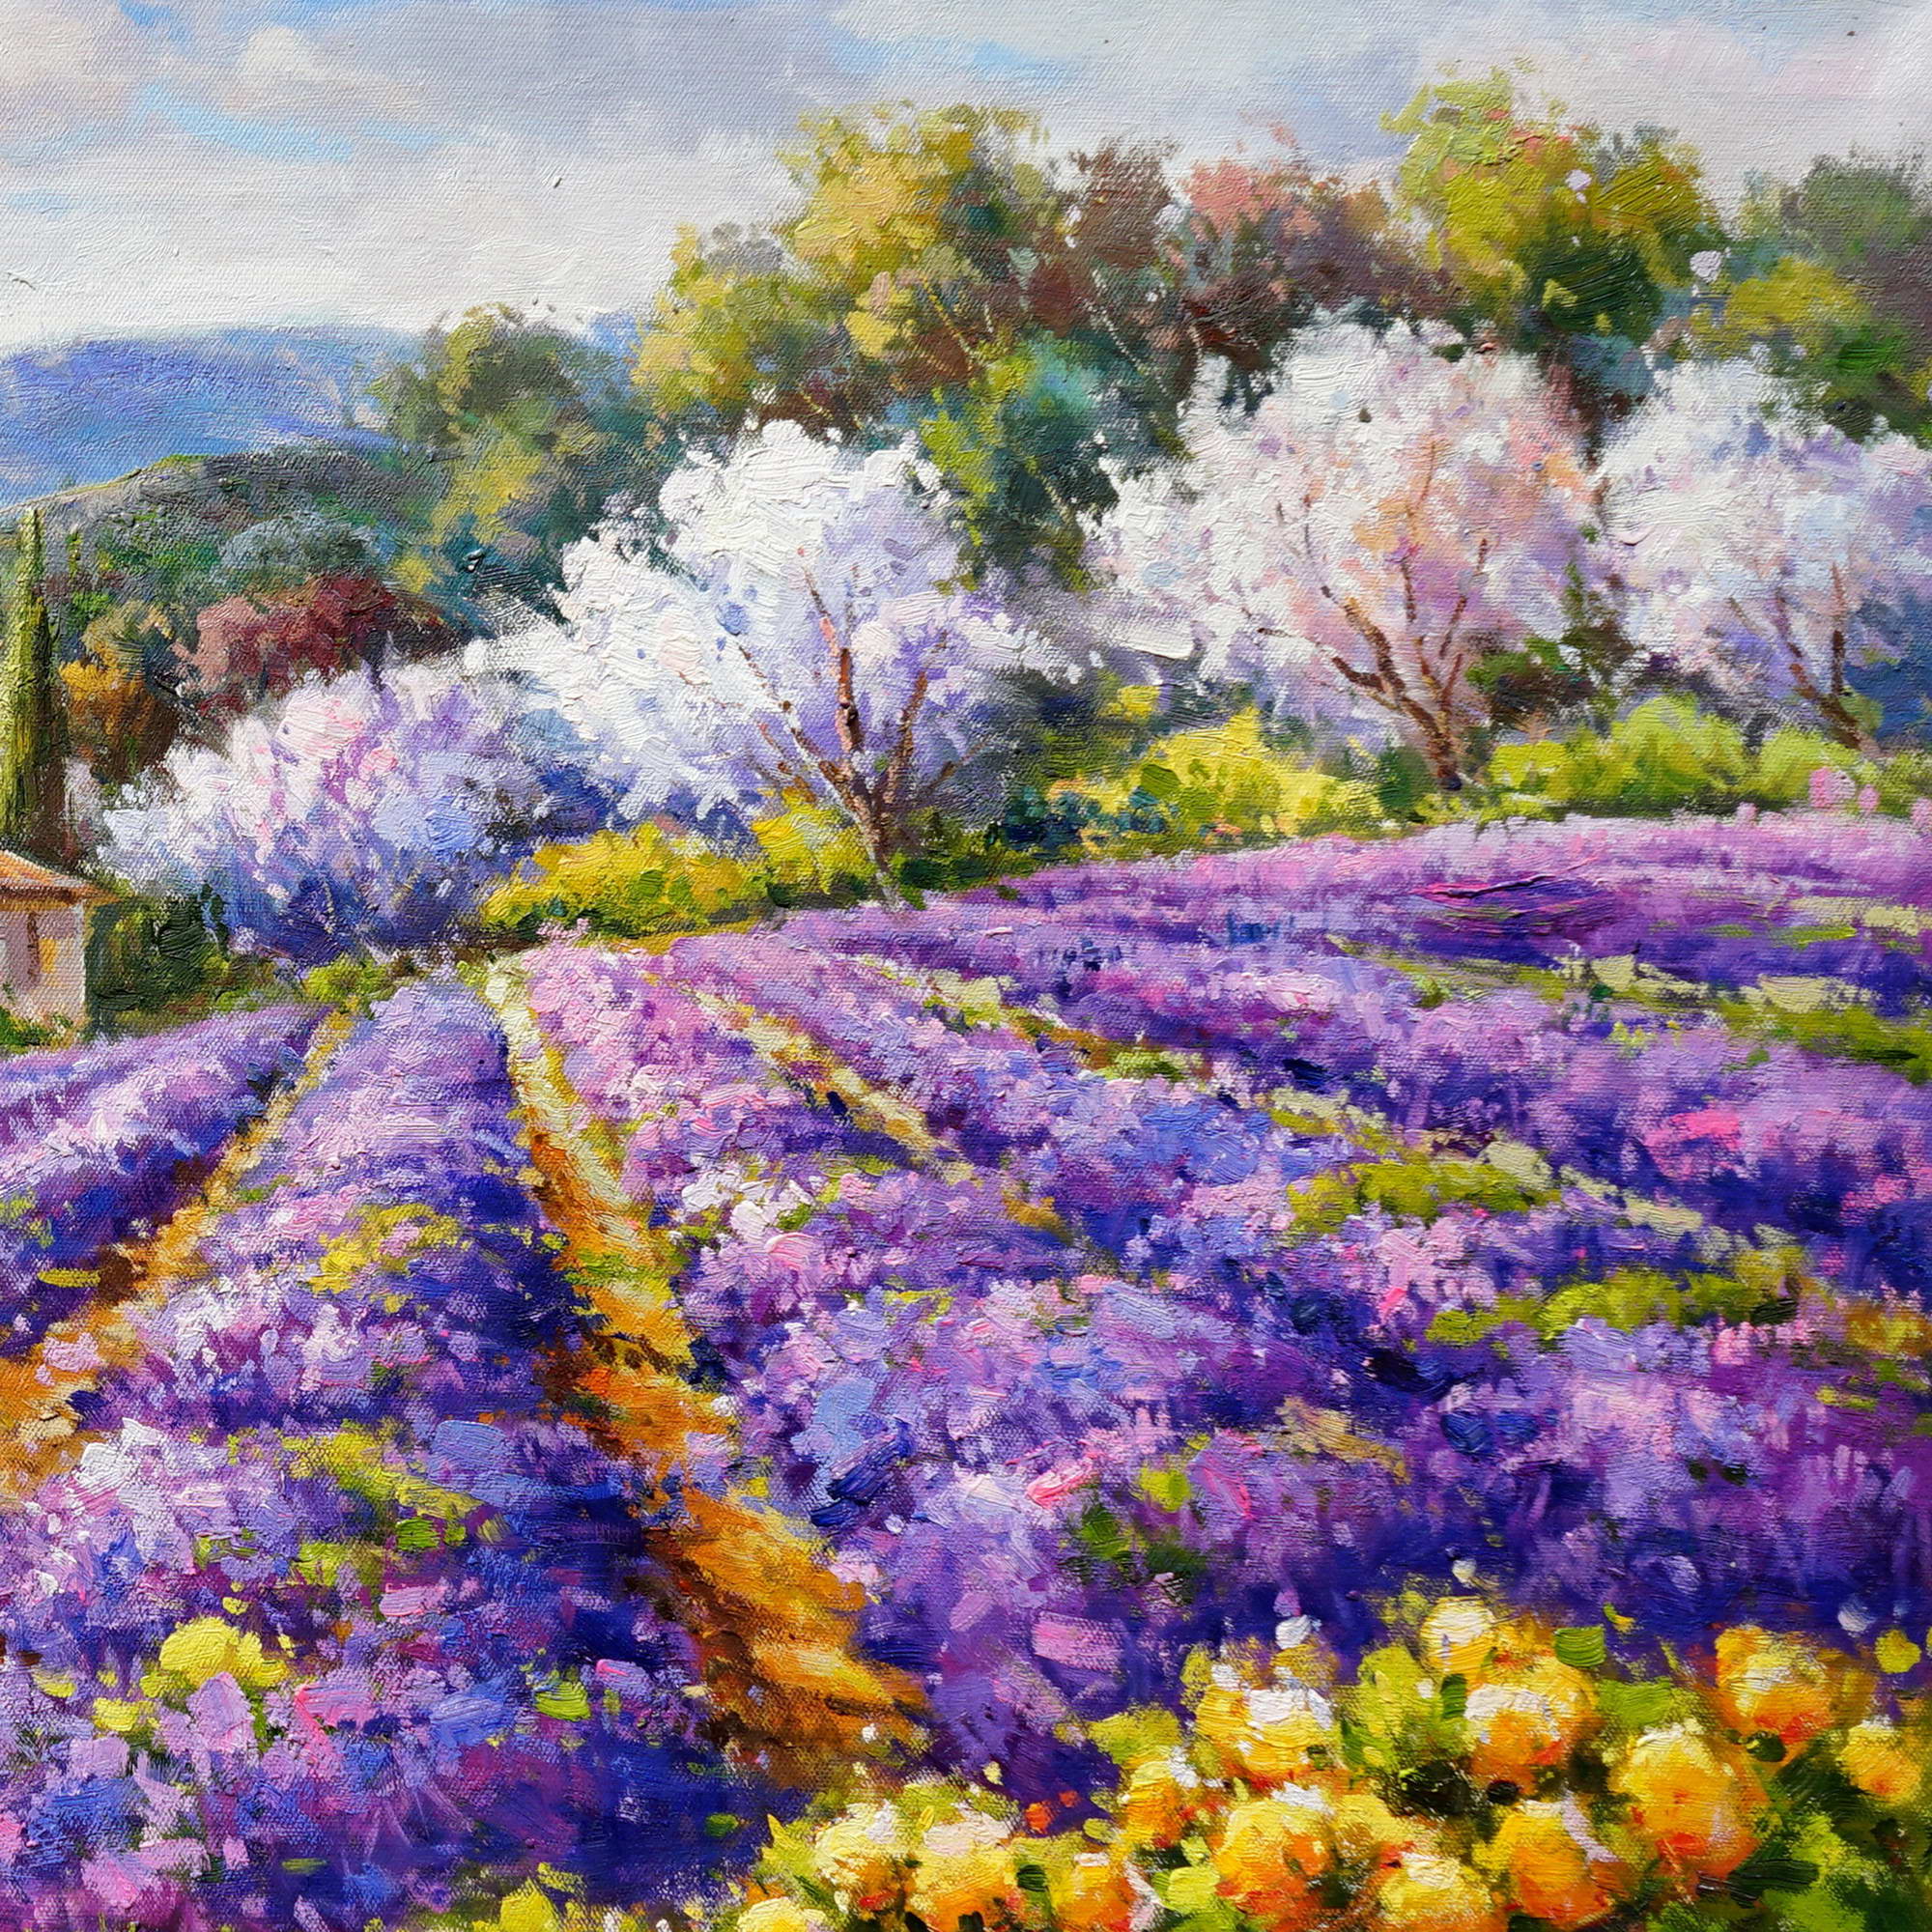 Hand painted Provence lavender fields 75x150cm